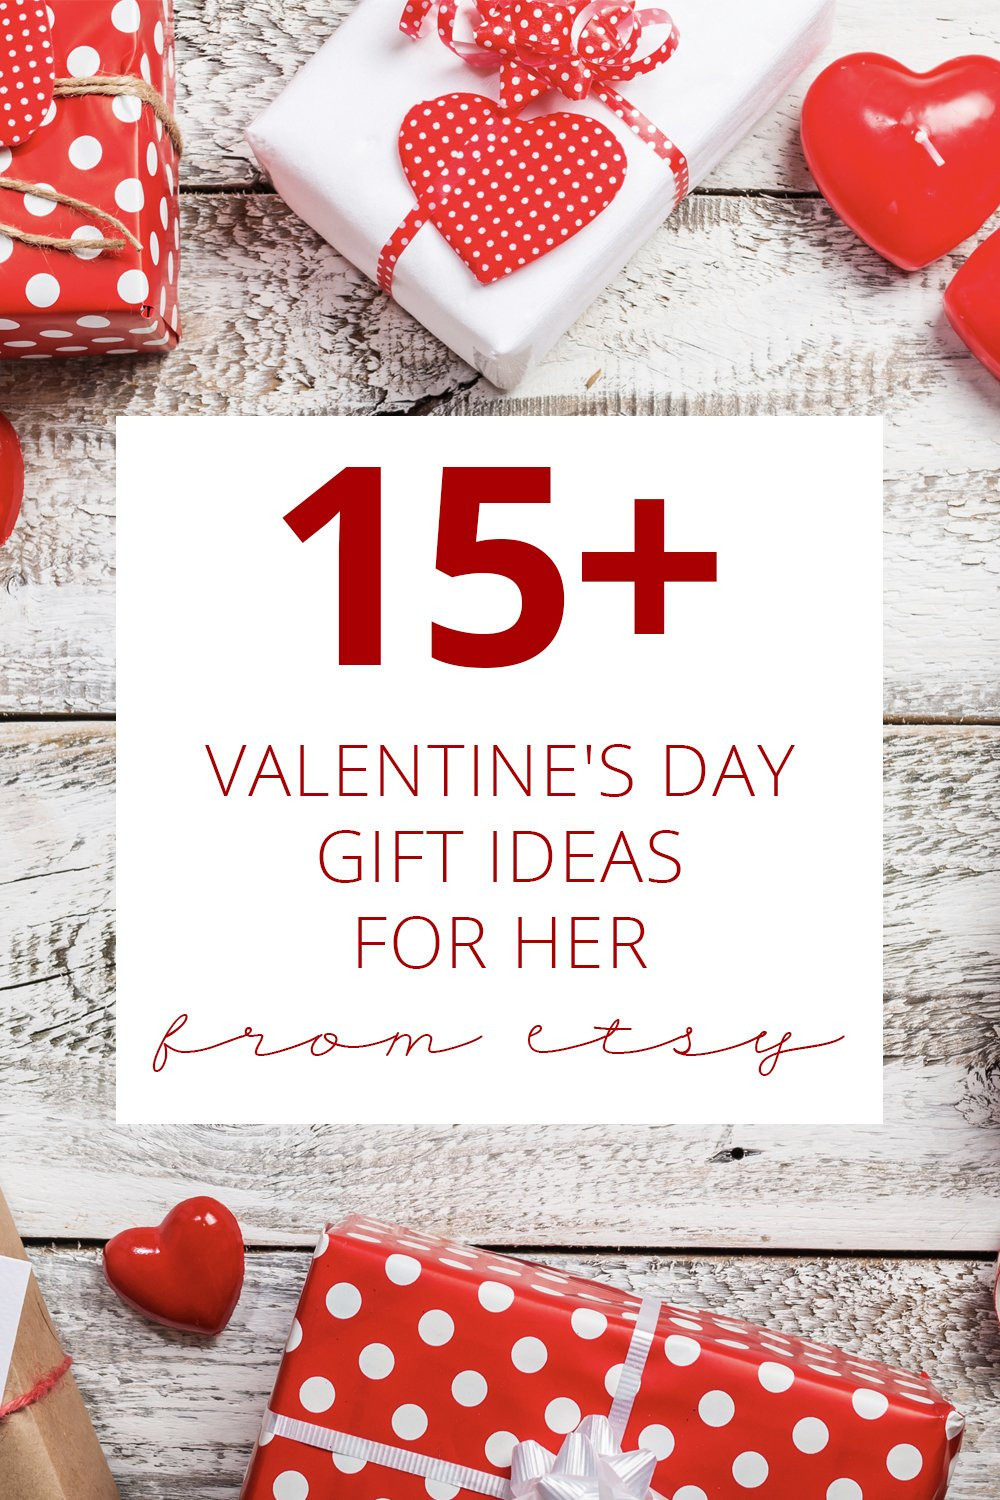 Gift Ideas For Her On Valentine'S Day
 15 Valentine s Day Gift Ideas for Her From Etsy